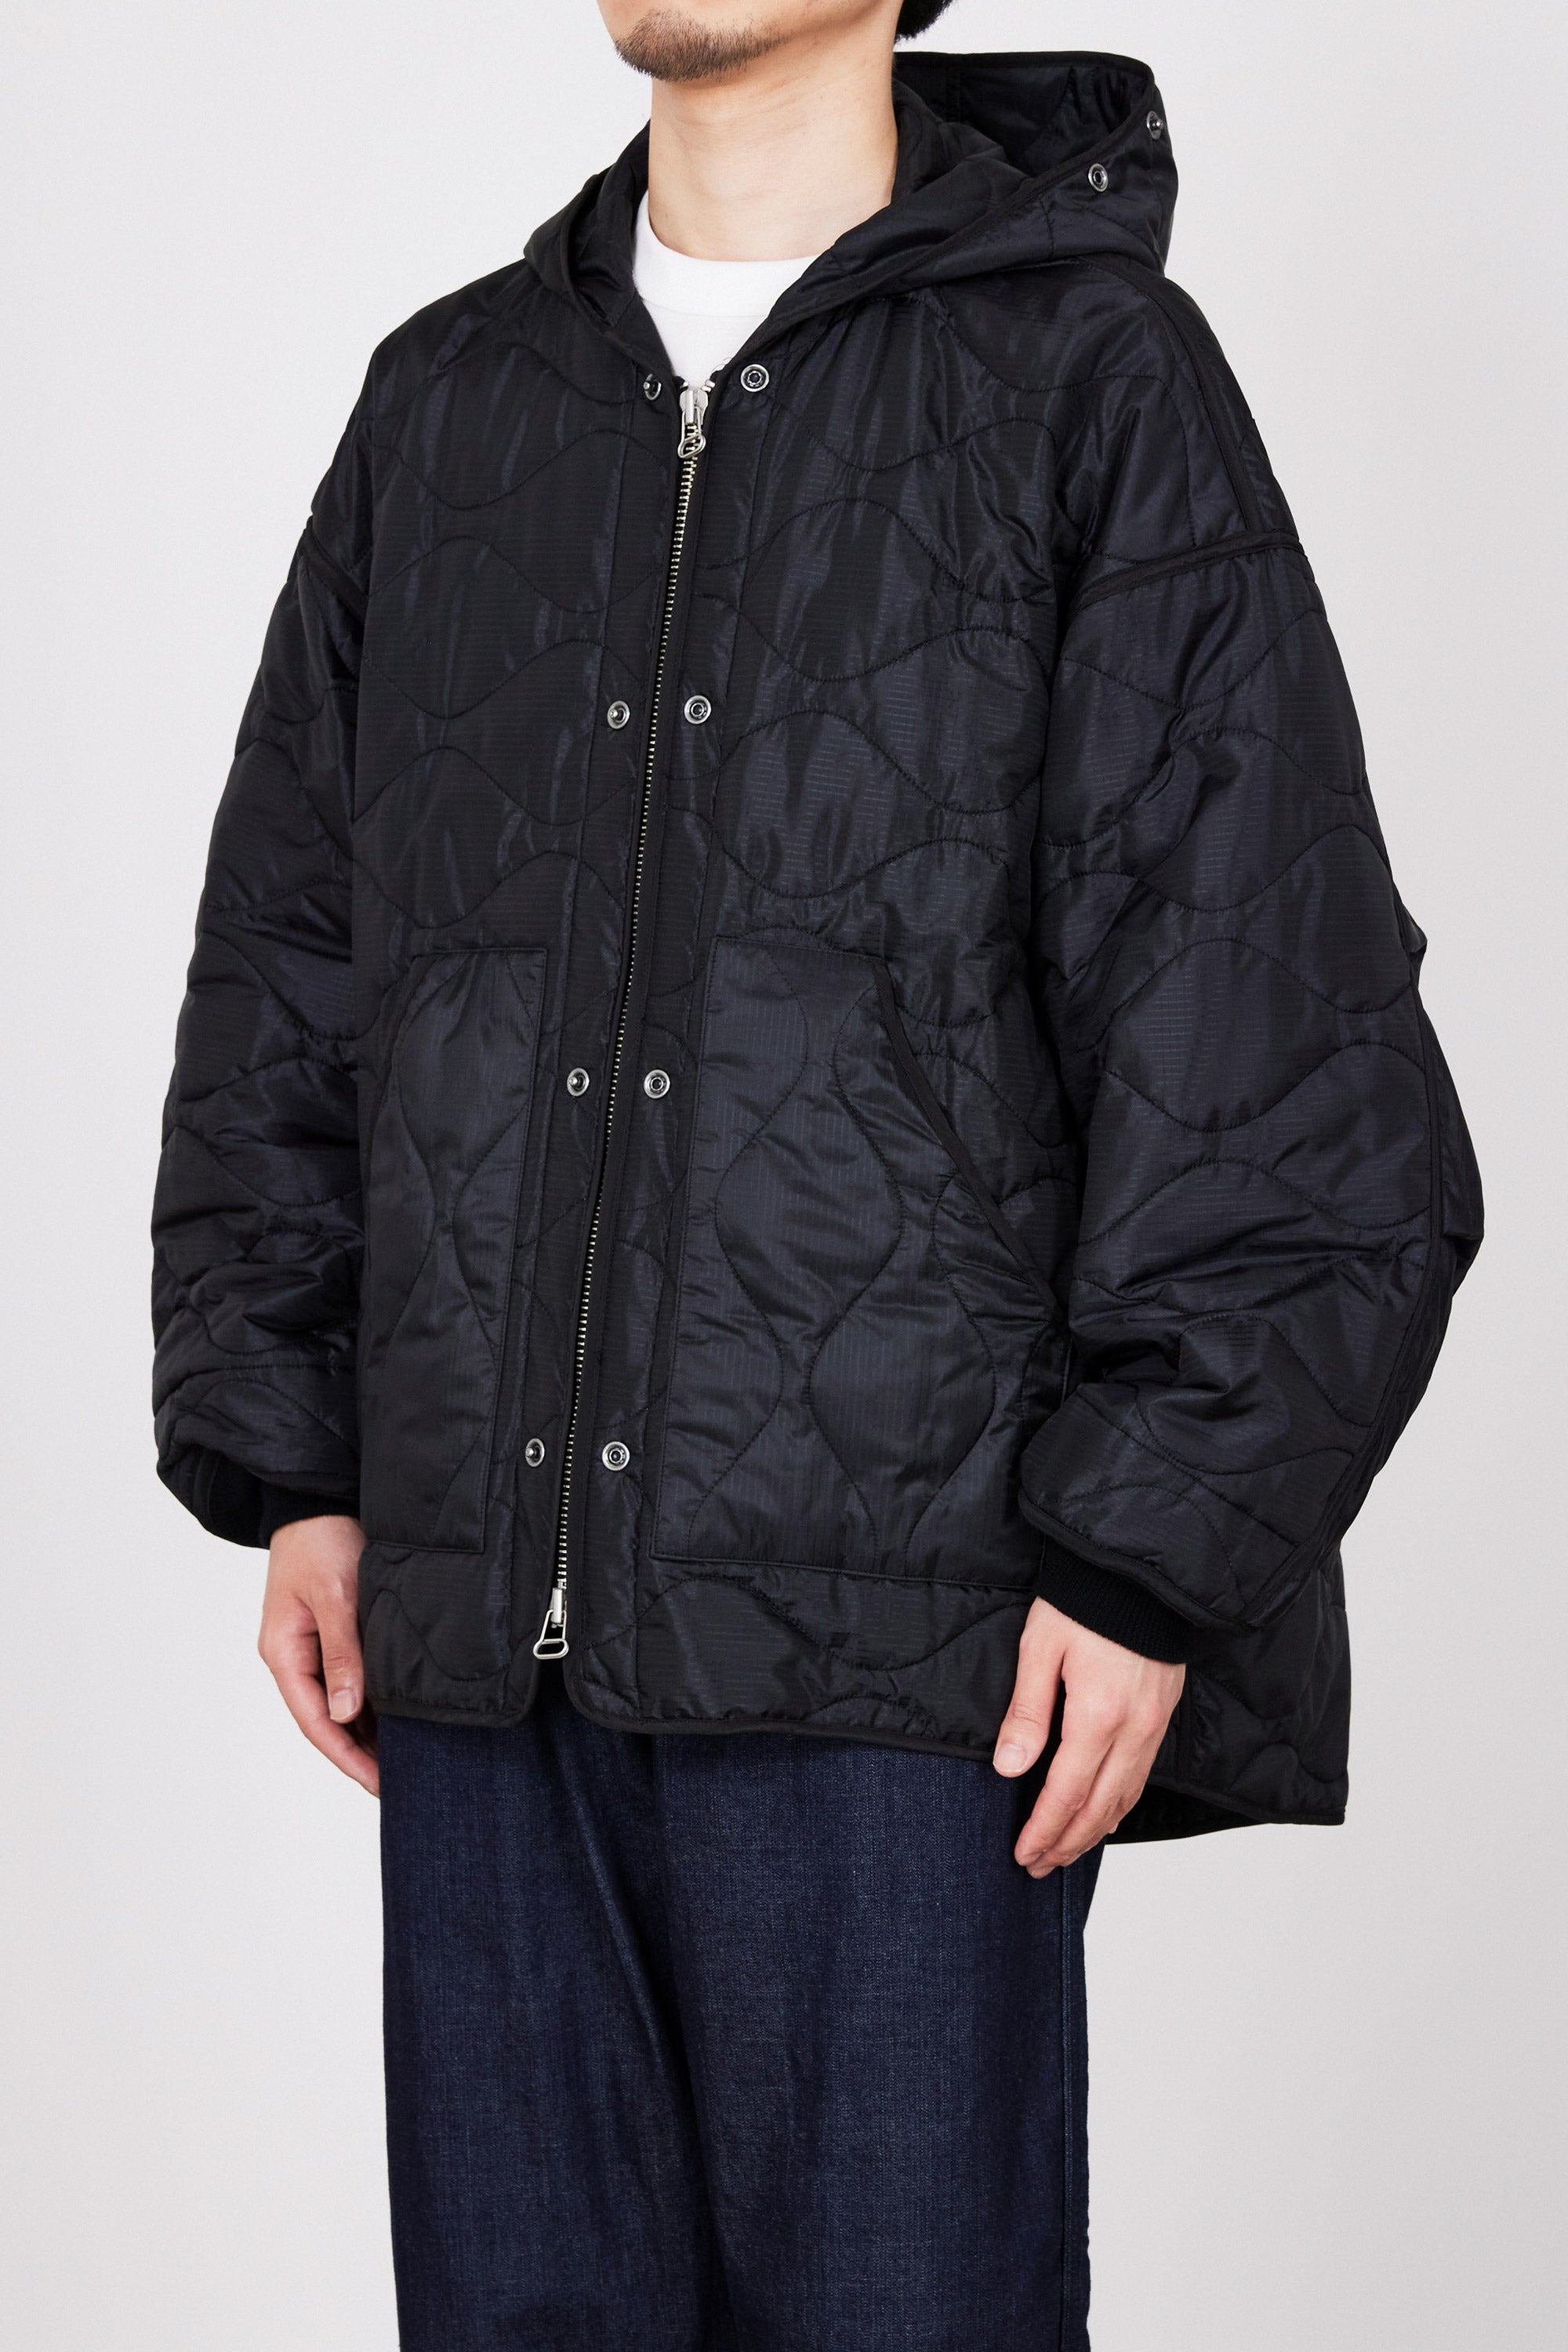 NYLON RIP STOP QUILTED LINER JACKET, Black